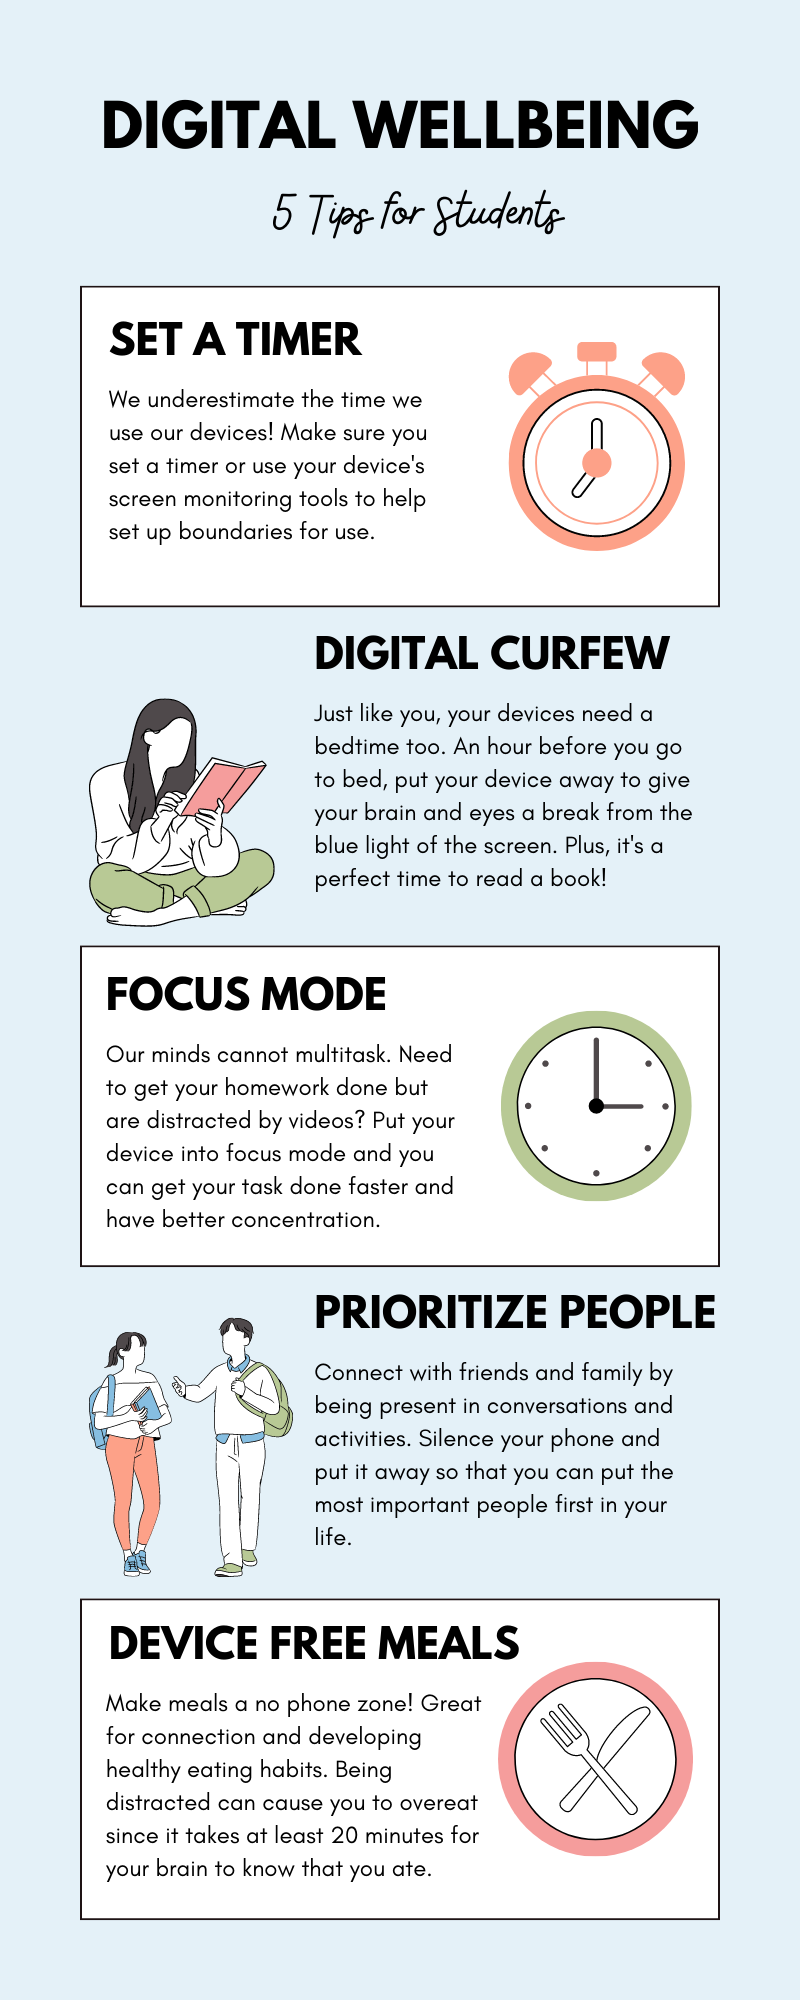 Tips for Digital WellBeing for Students